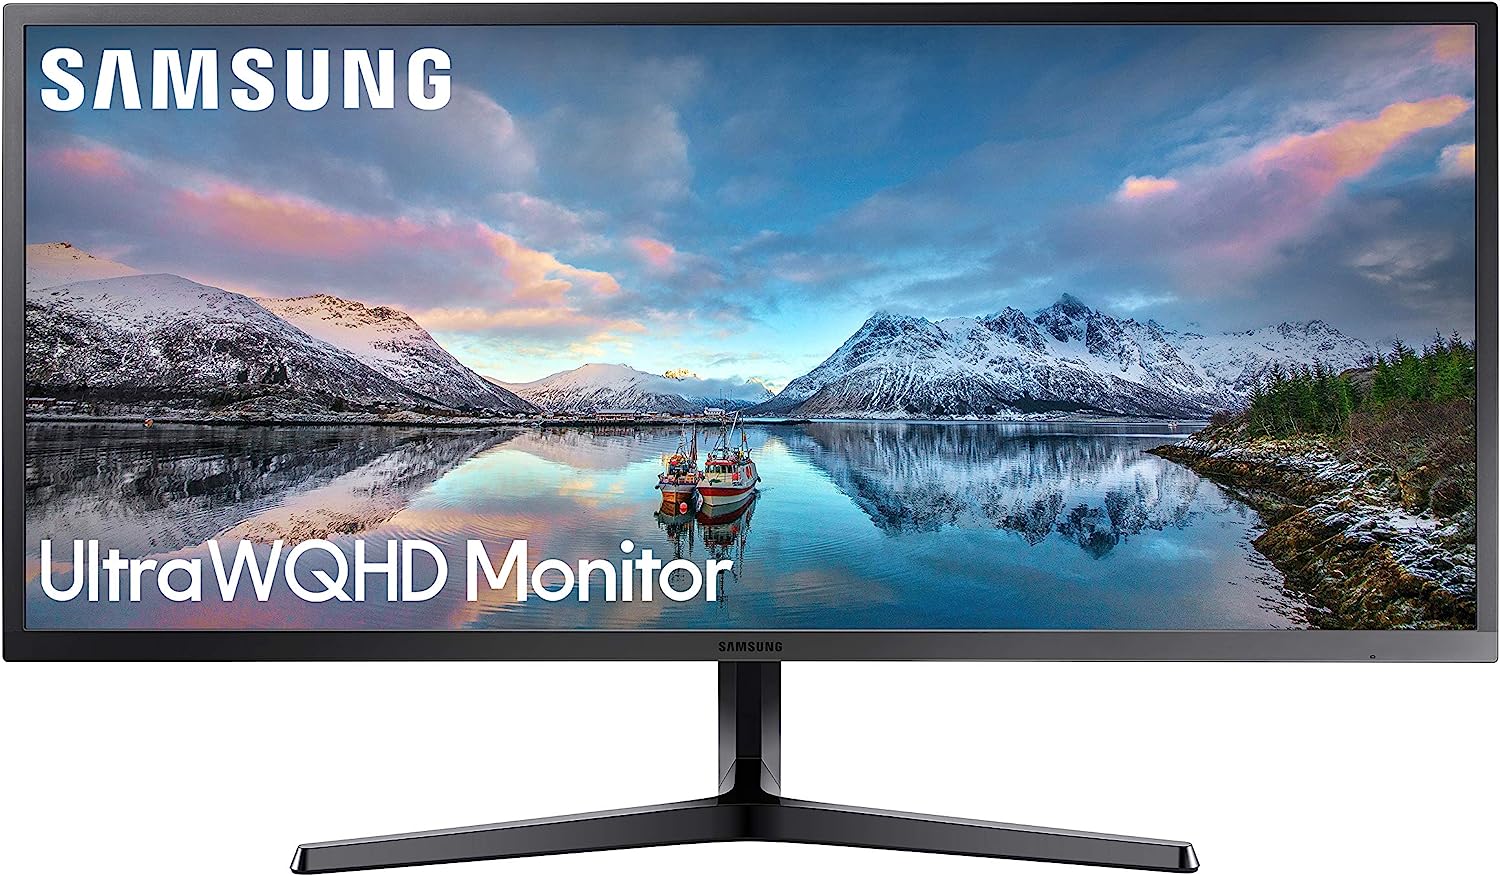 Samsung 34-inch Class Ultrawide Monitor with 21:9 Wide [...]